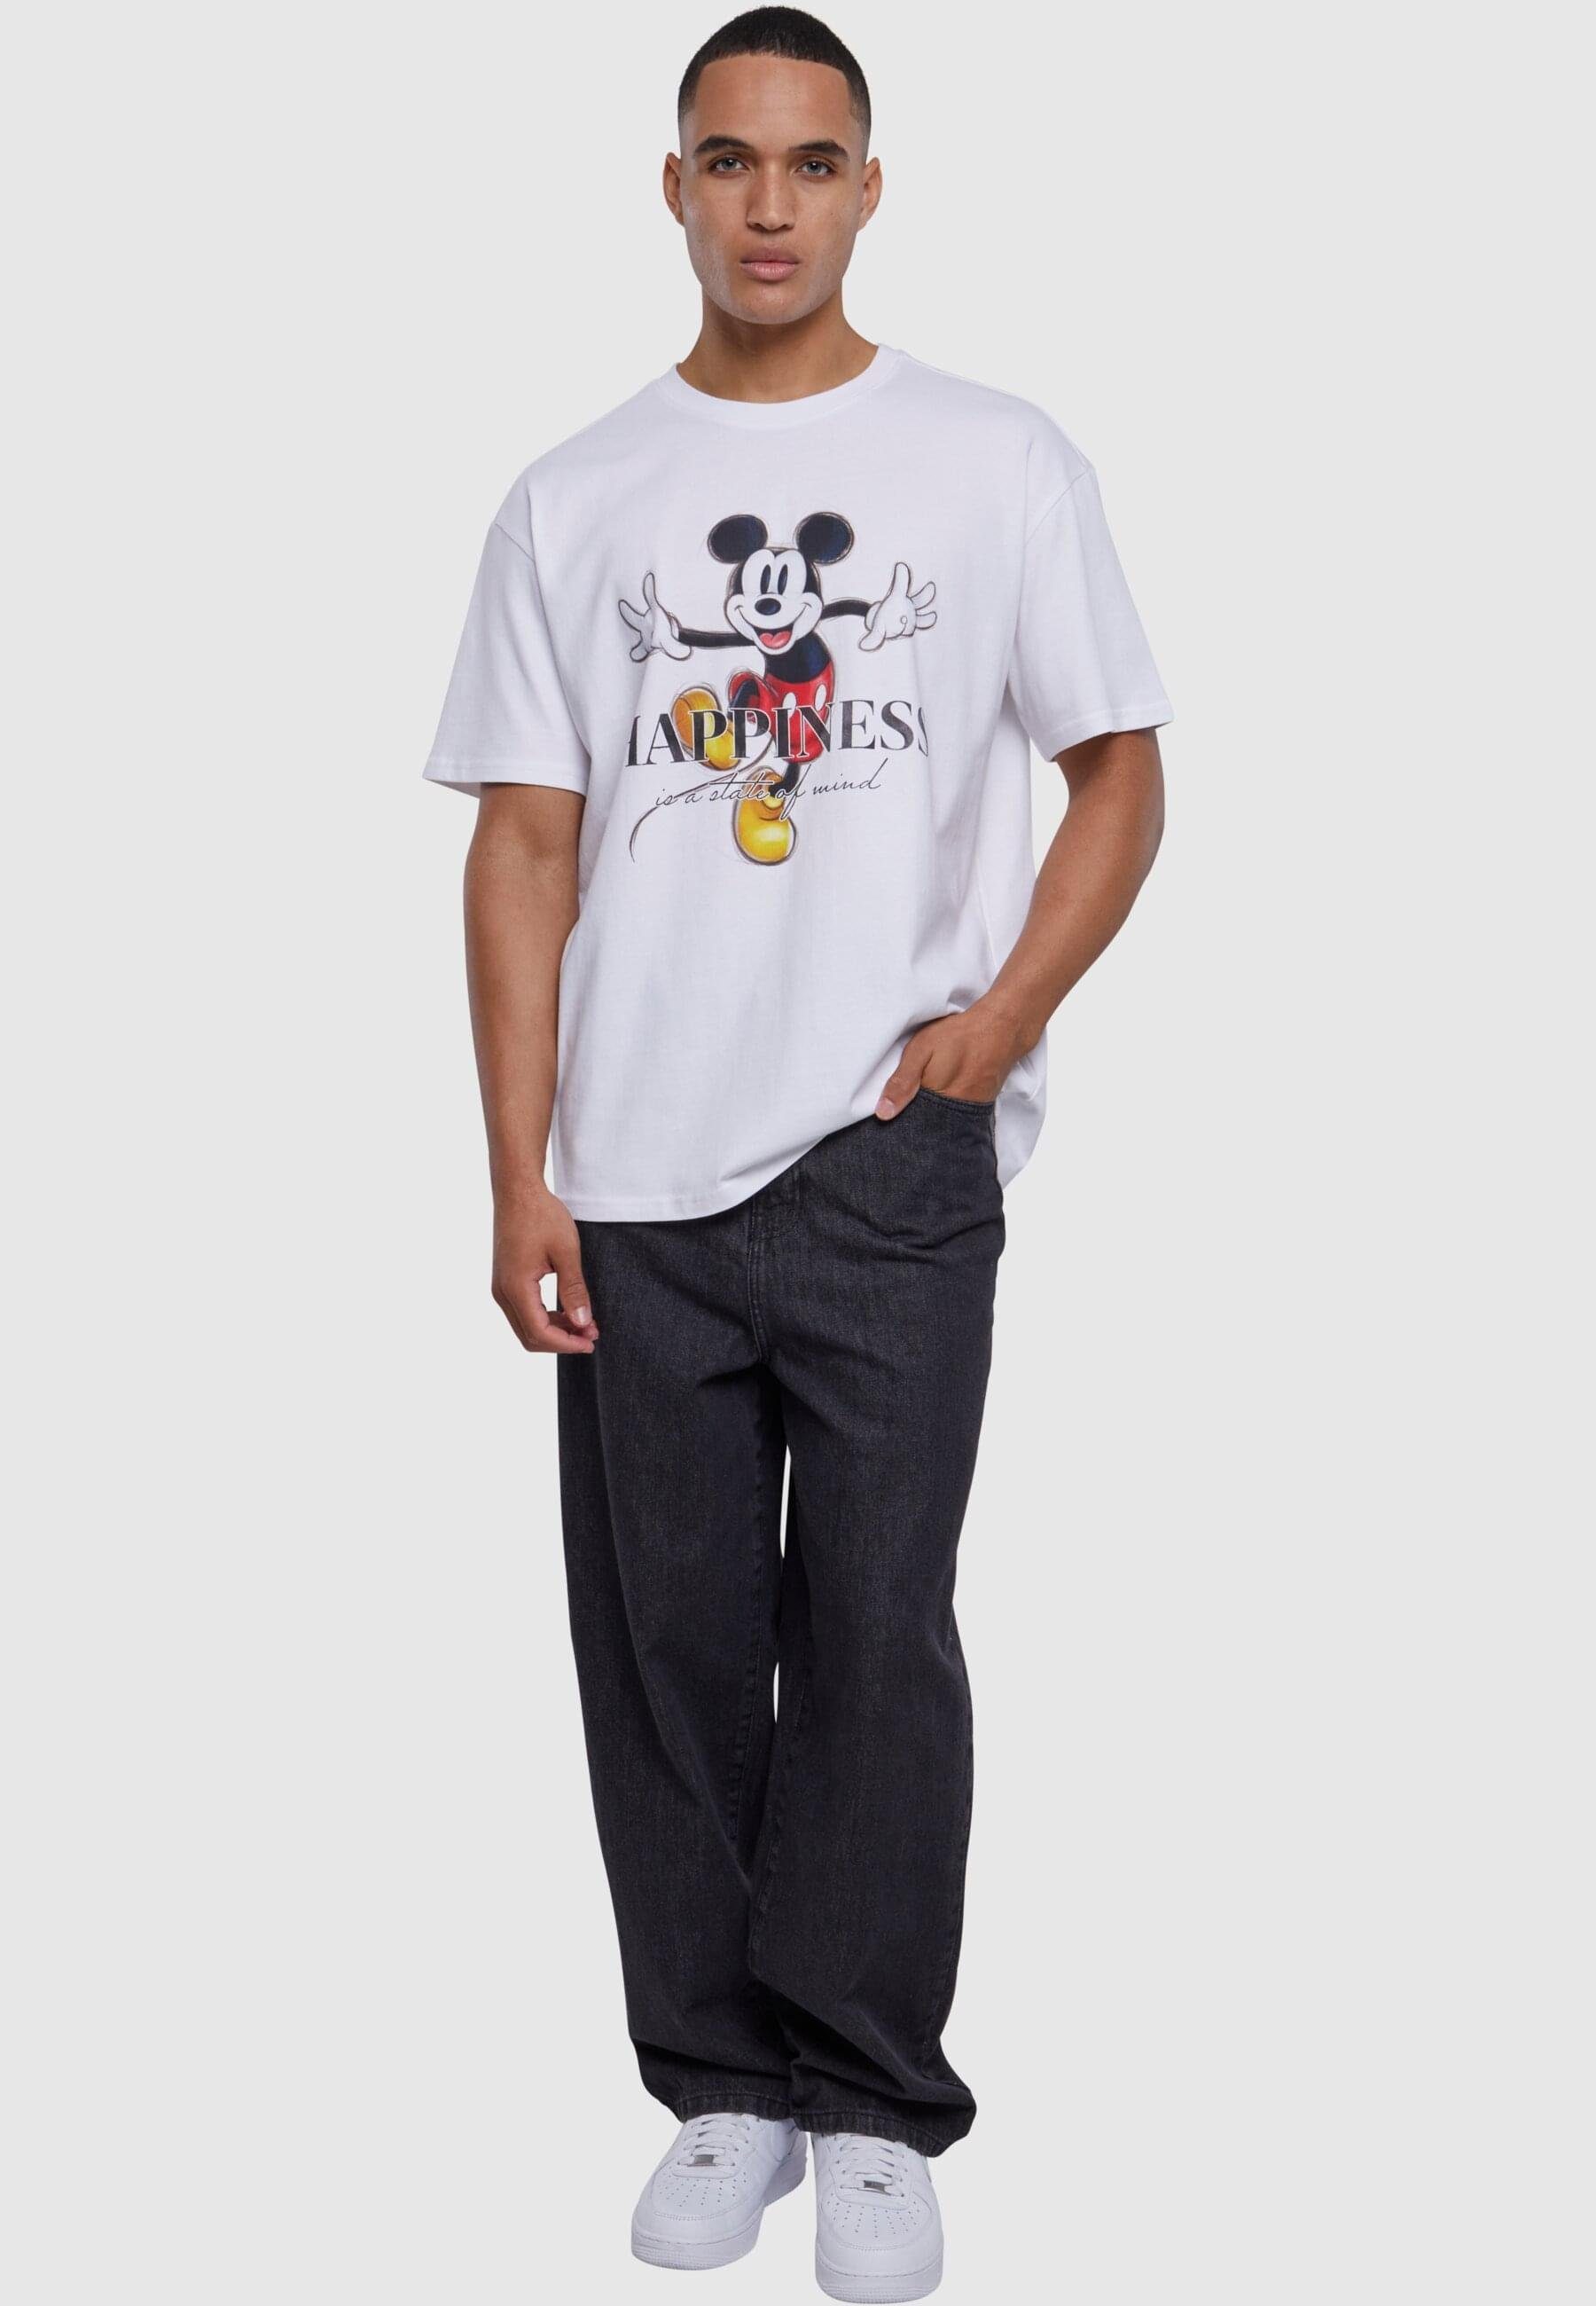 Tee Mister 100 Tee Mickey Oversize Unisex Upscale Disney Happiness by (1-tlg) T-Shirt